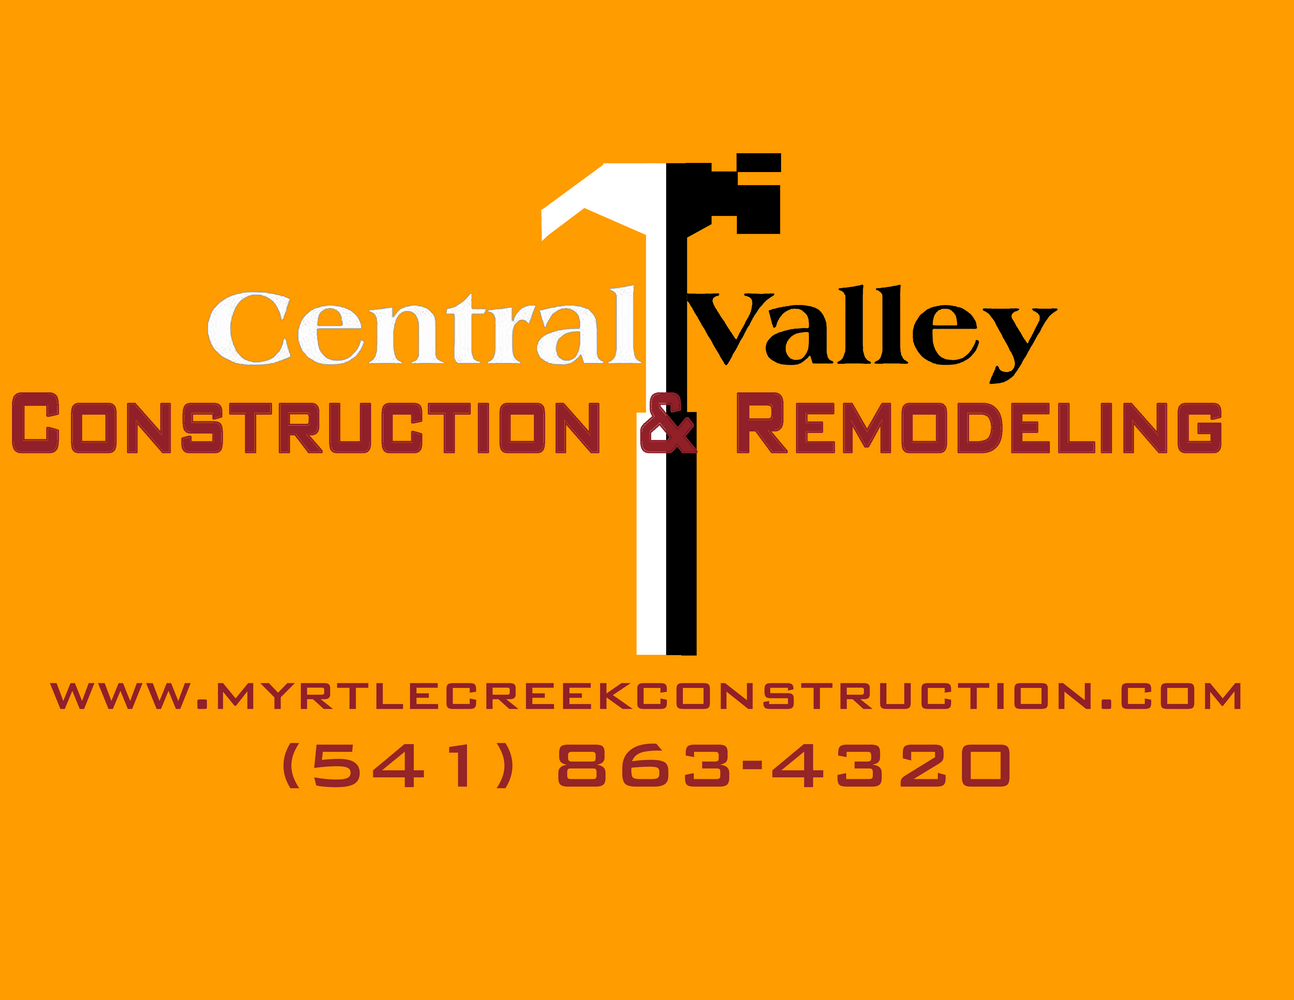 Central Valley Construction & Remodeling RE-VAMPED!